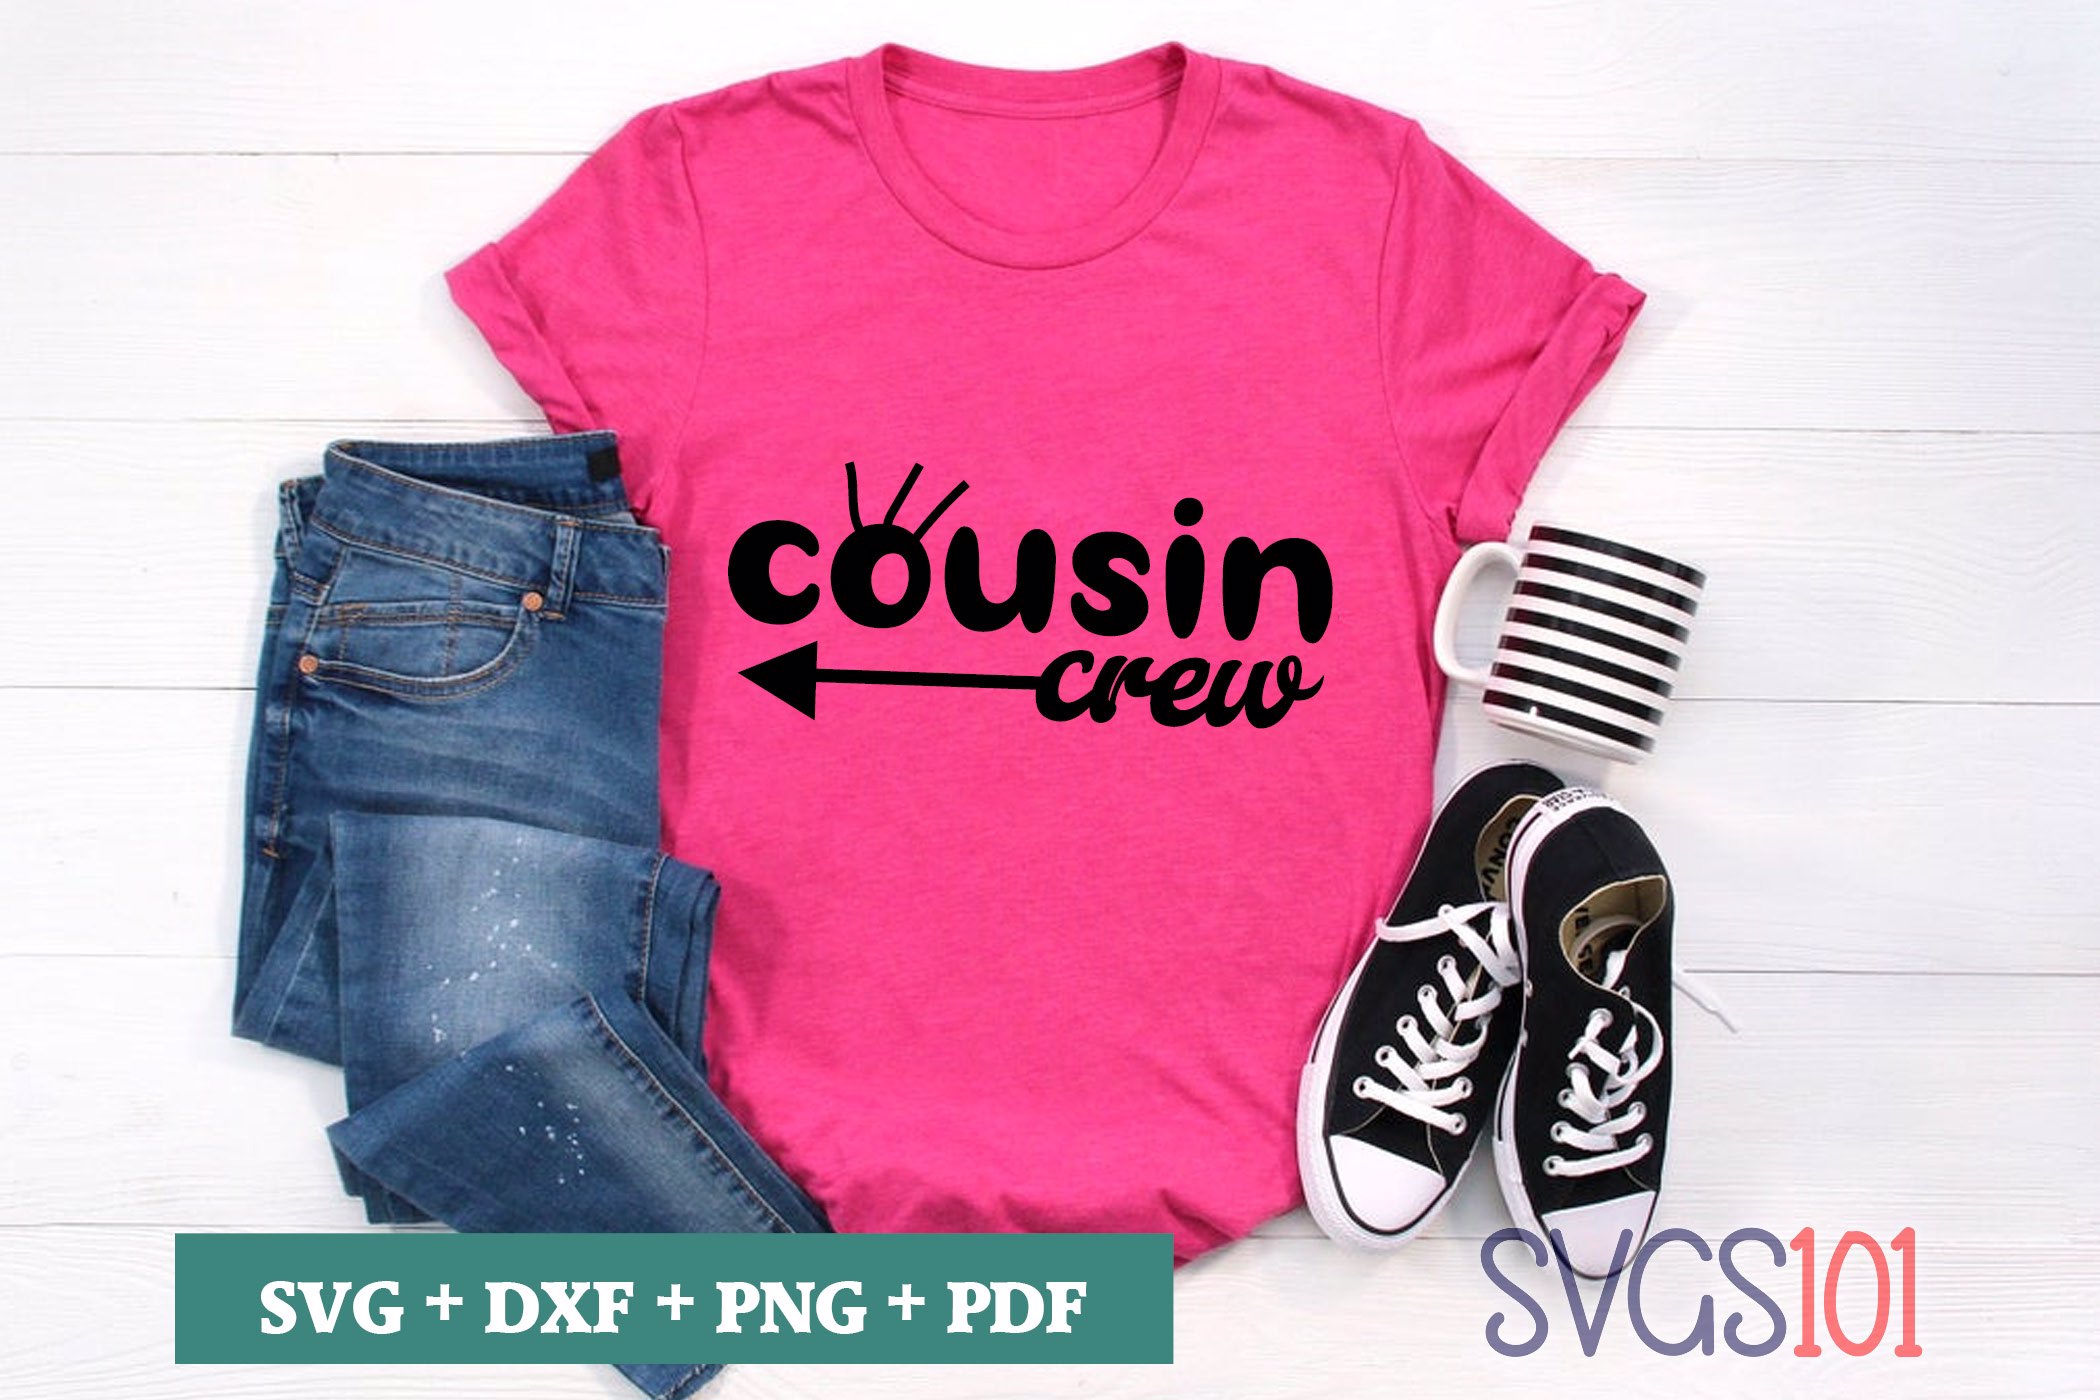 Download Cousin Crew SVG Cuttable file - DXF, EPS, PNG, PDF | SVG ...